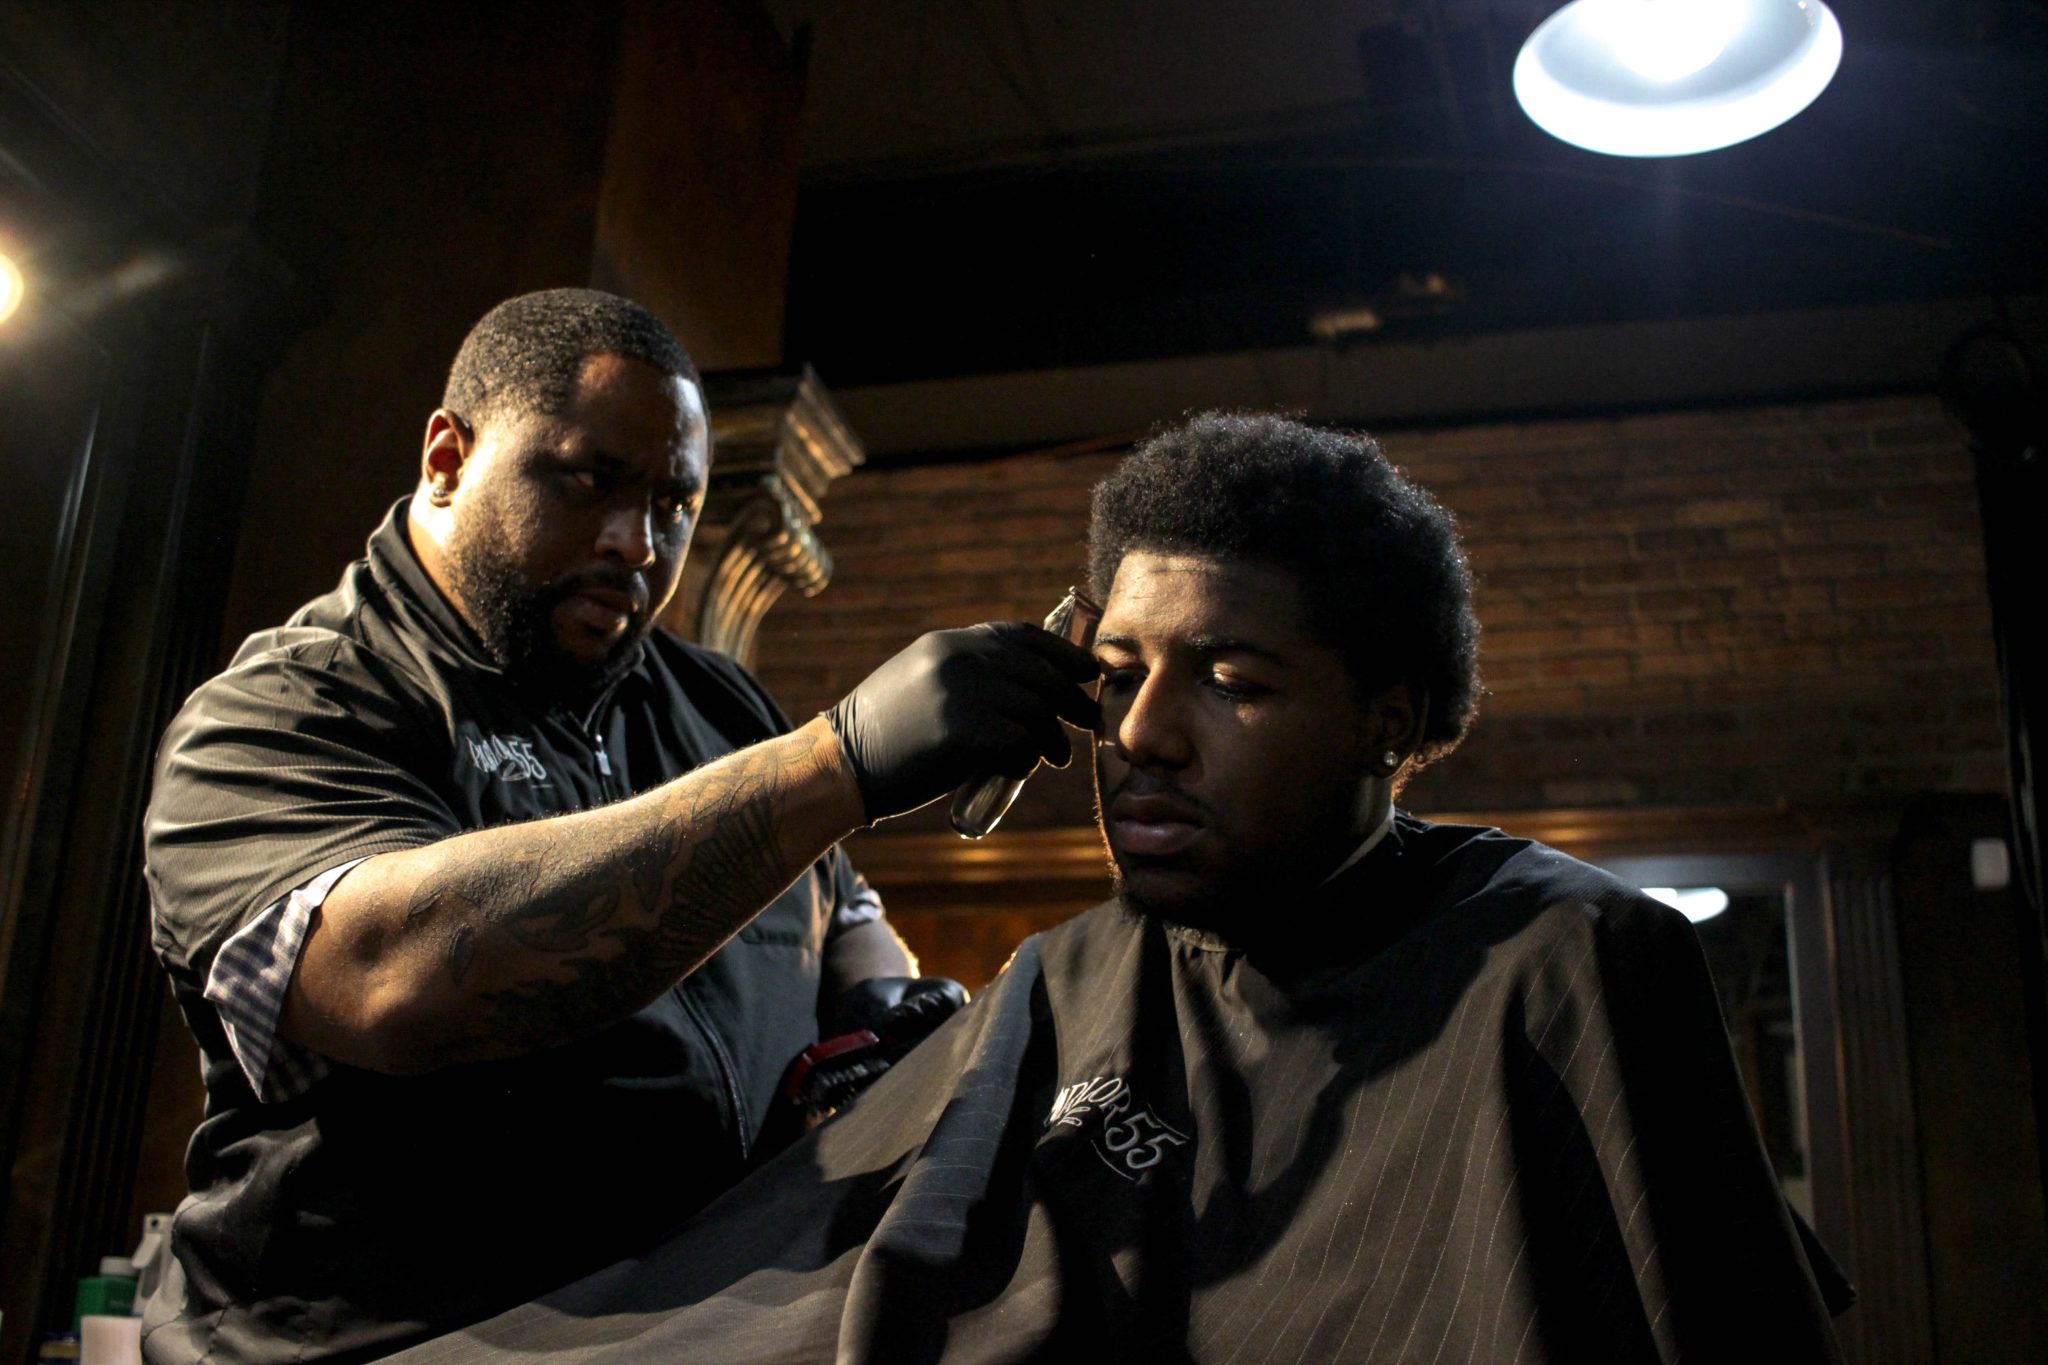 A Black barber shaves the temple of a Black man in a barber shop